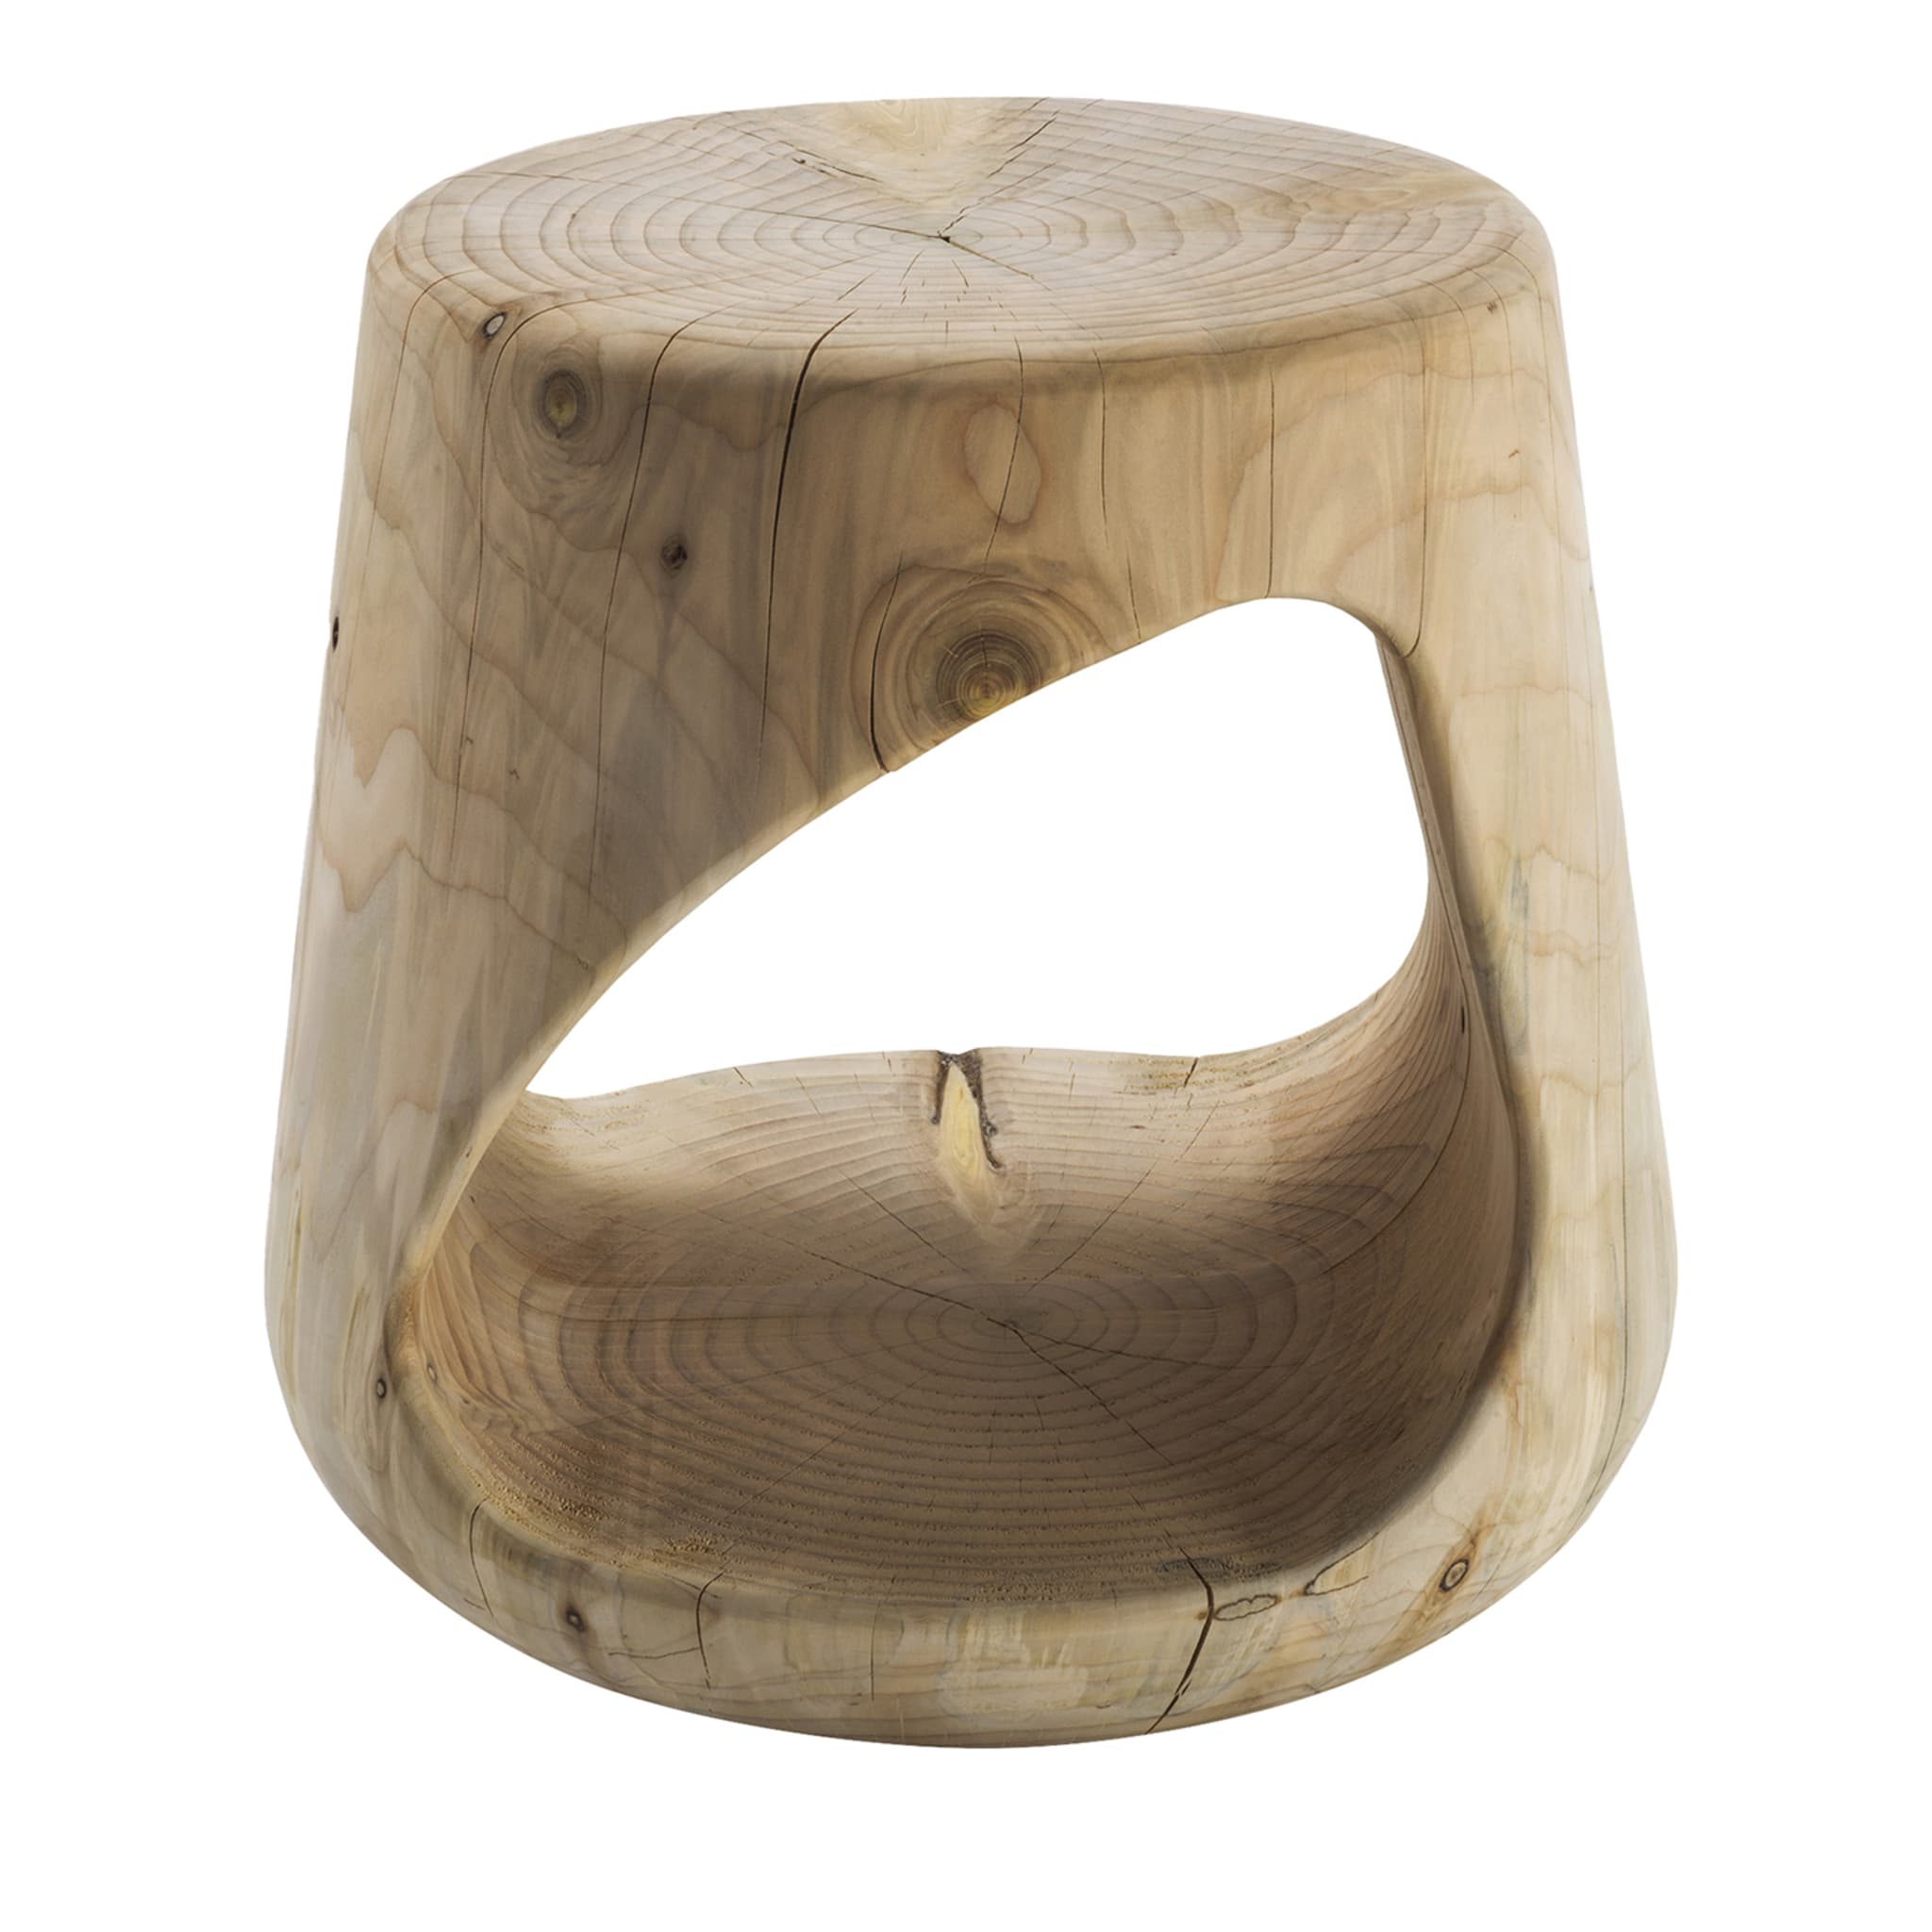 Geppo Stool by Marco Baxadonne - Main view